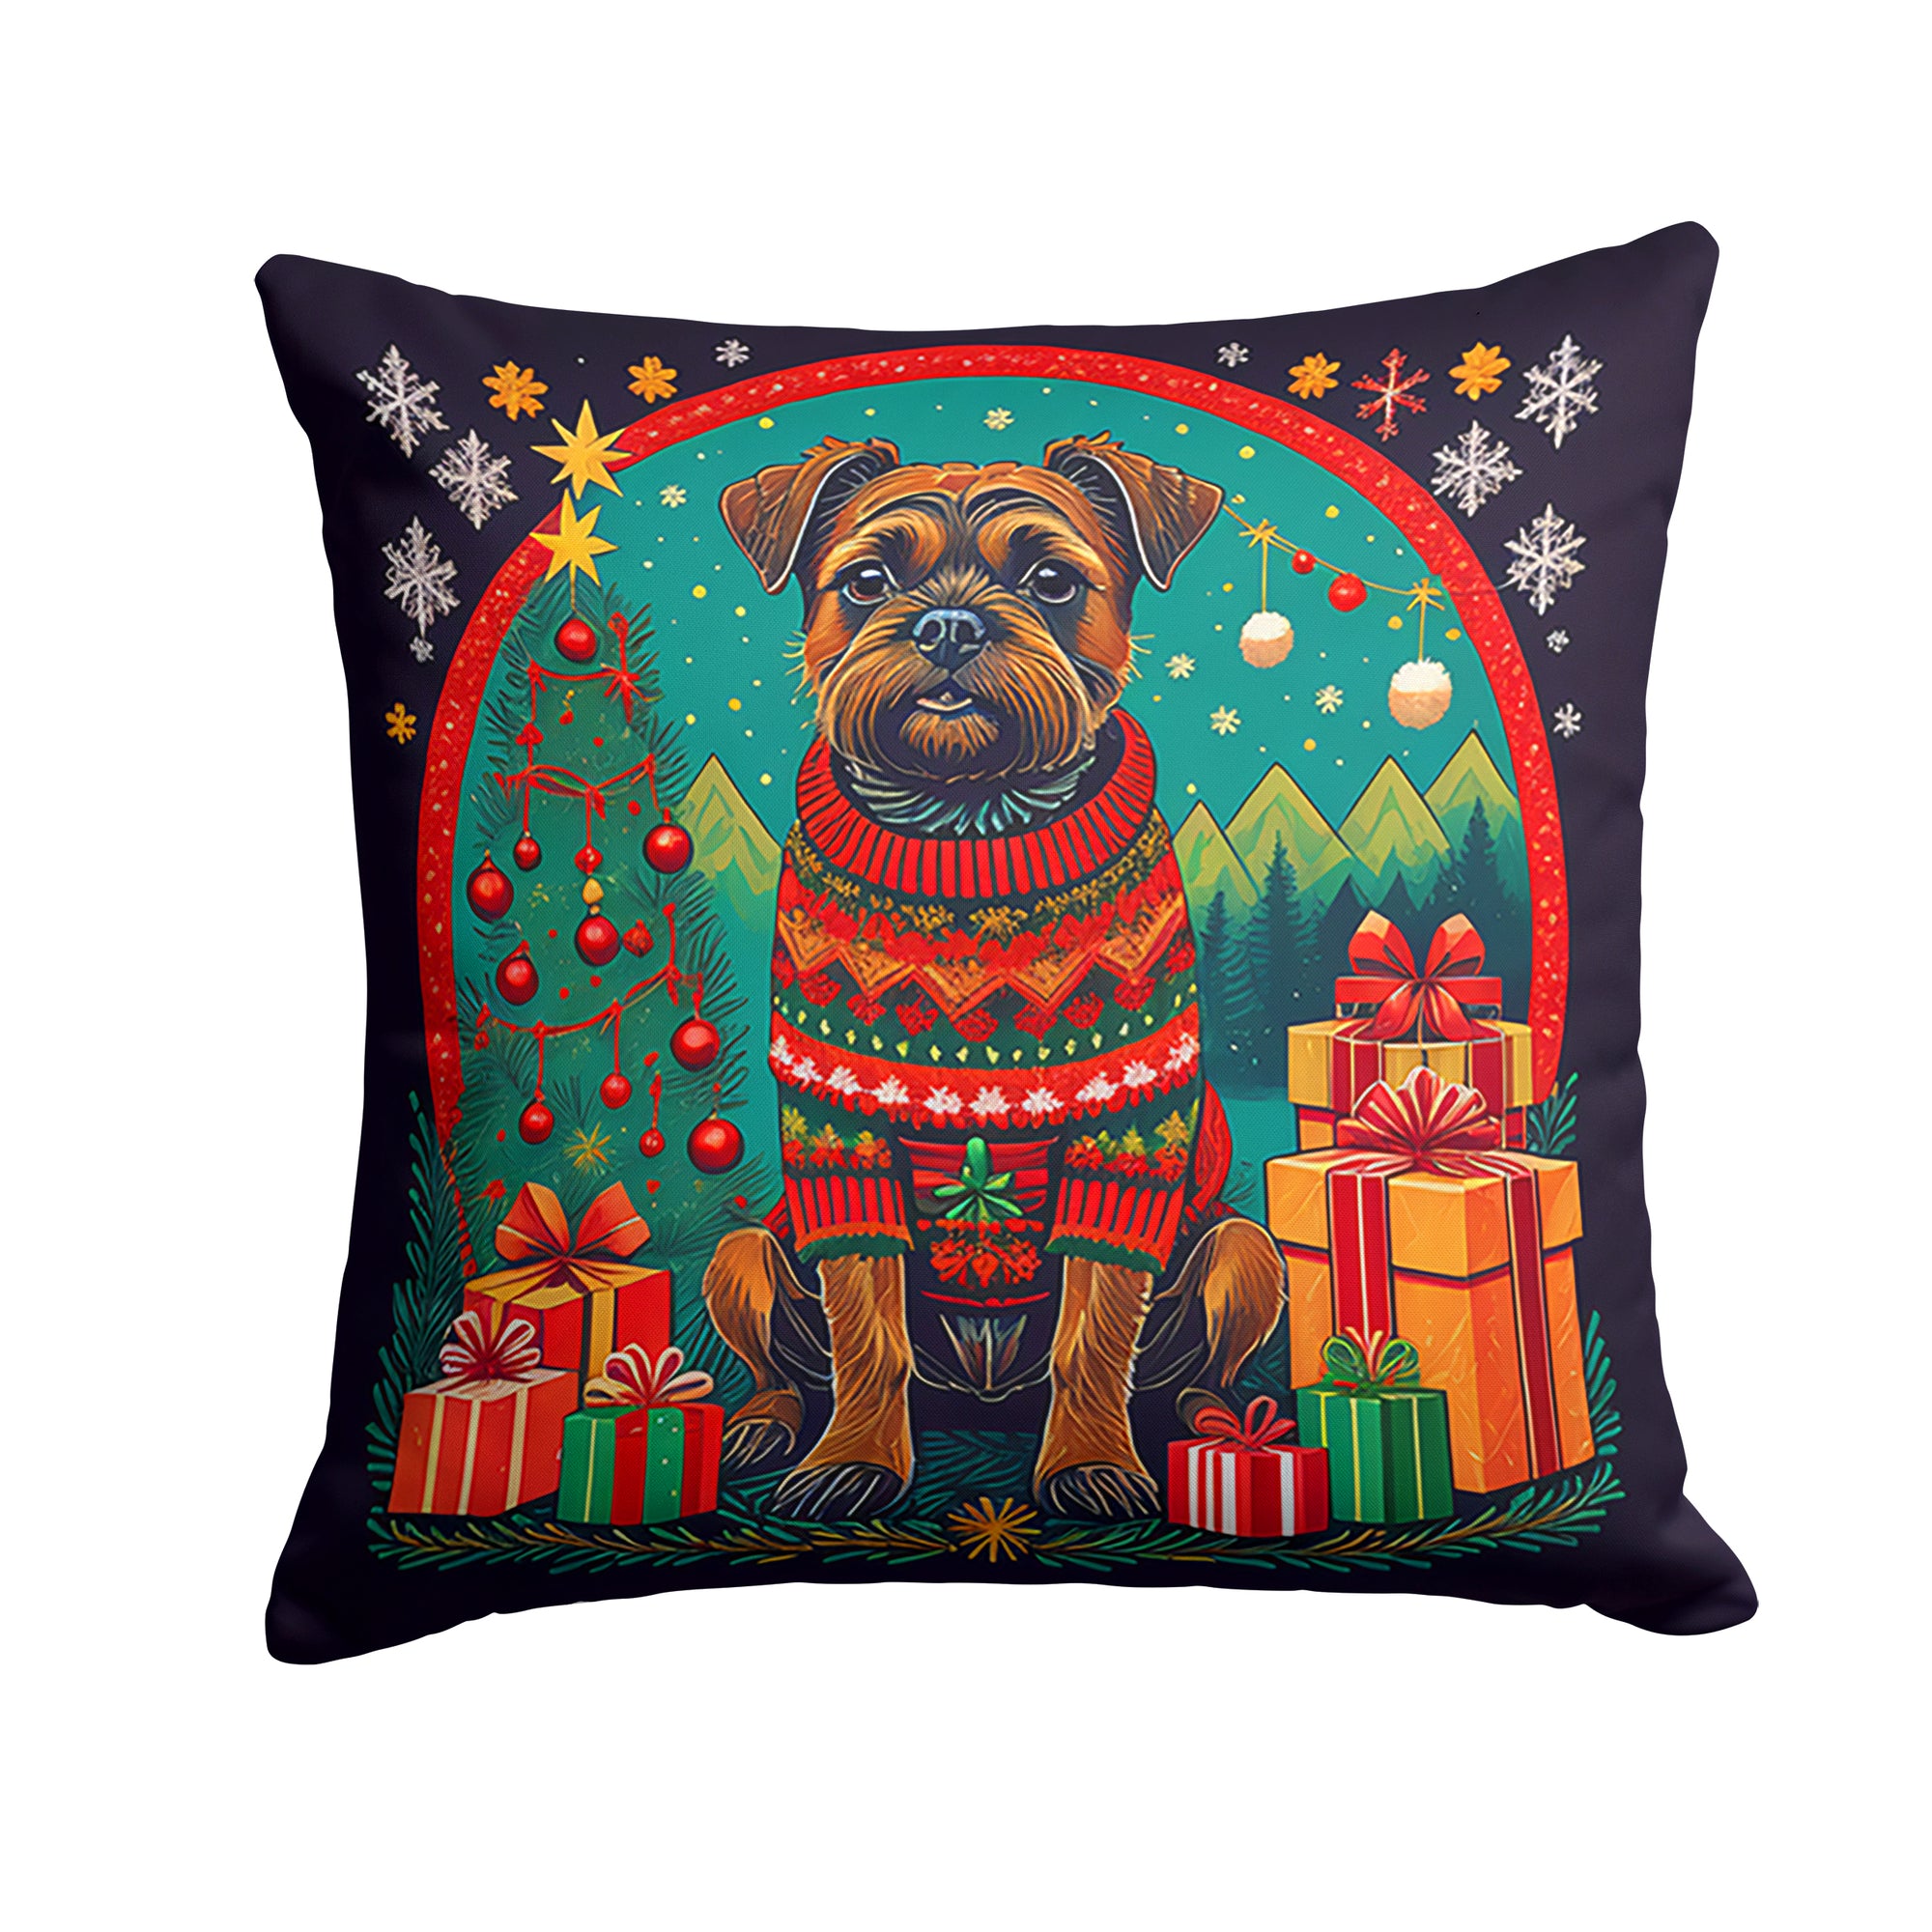 Buy this Border Terrier Christmas Fabric Decorative Pillow